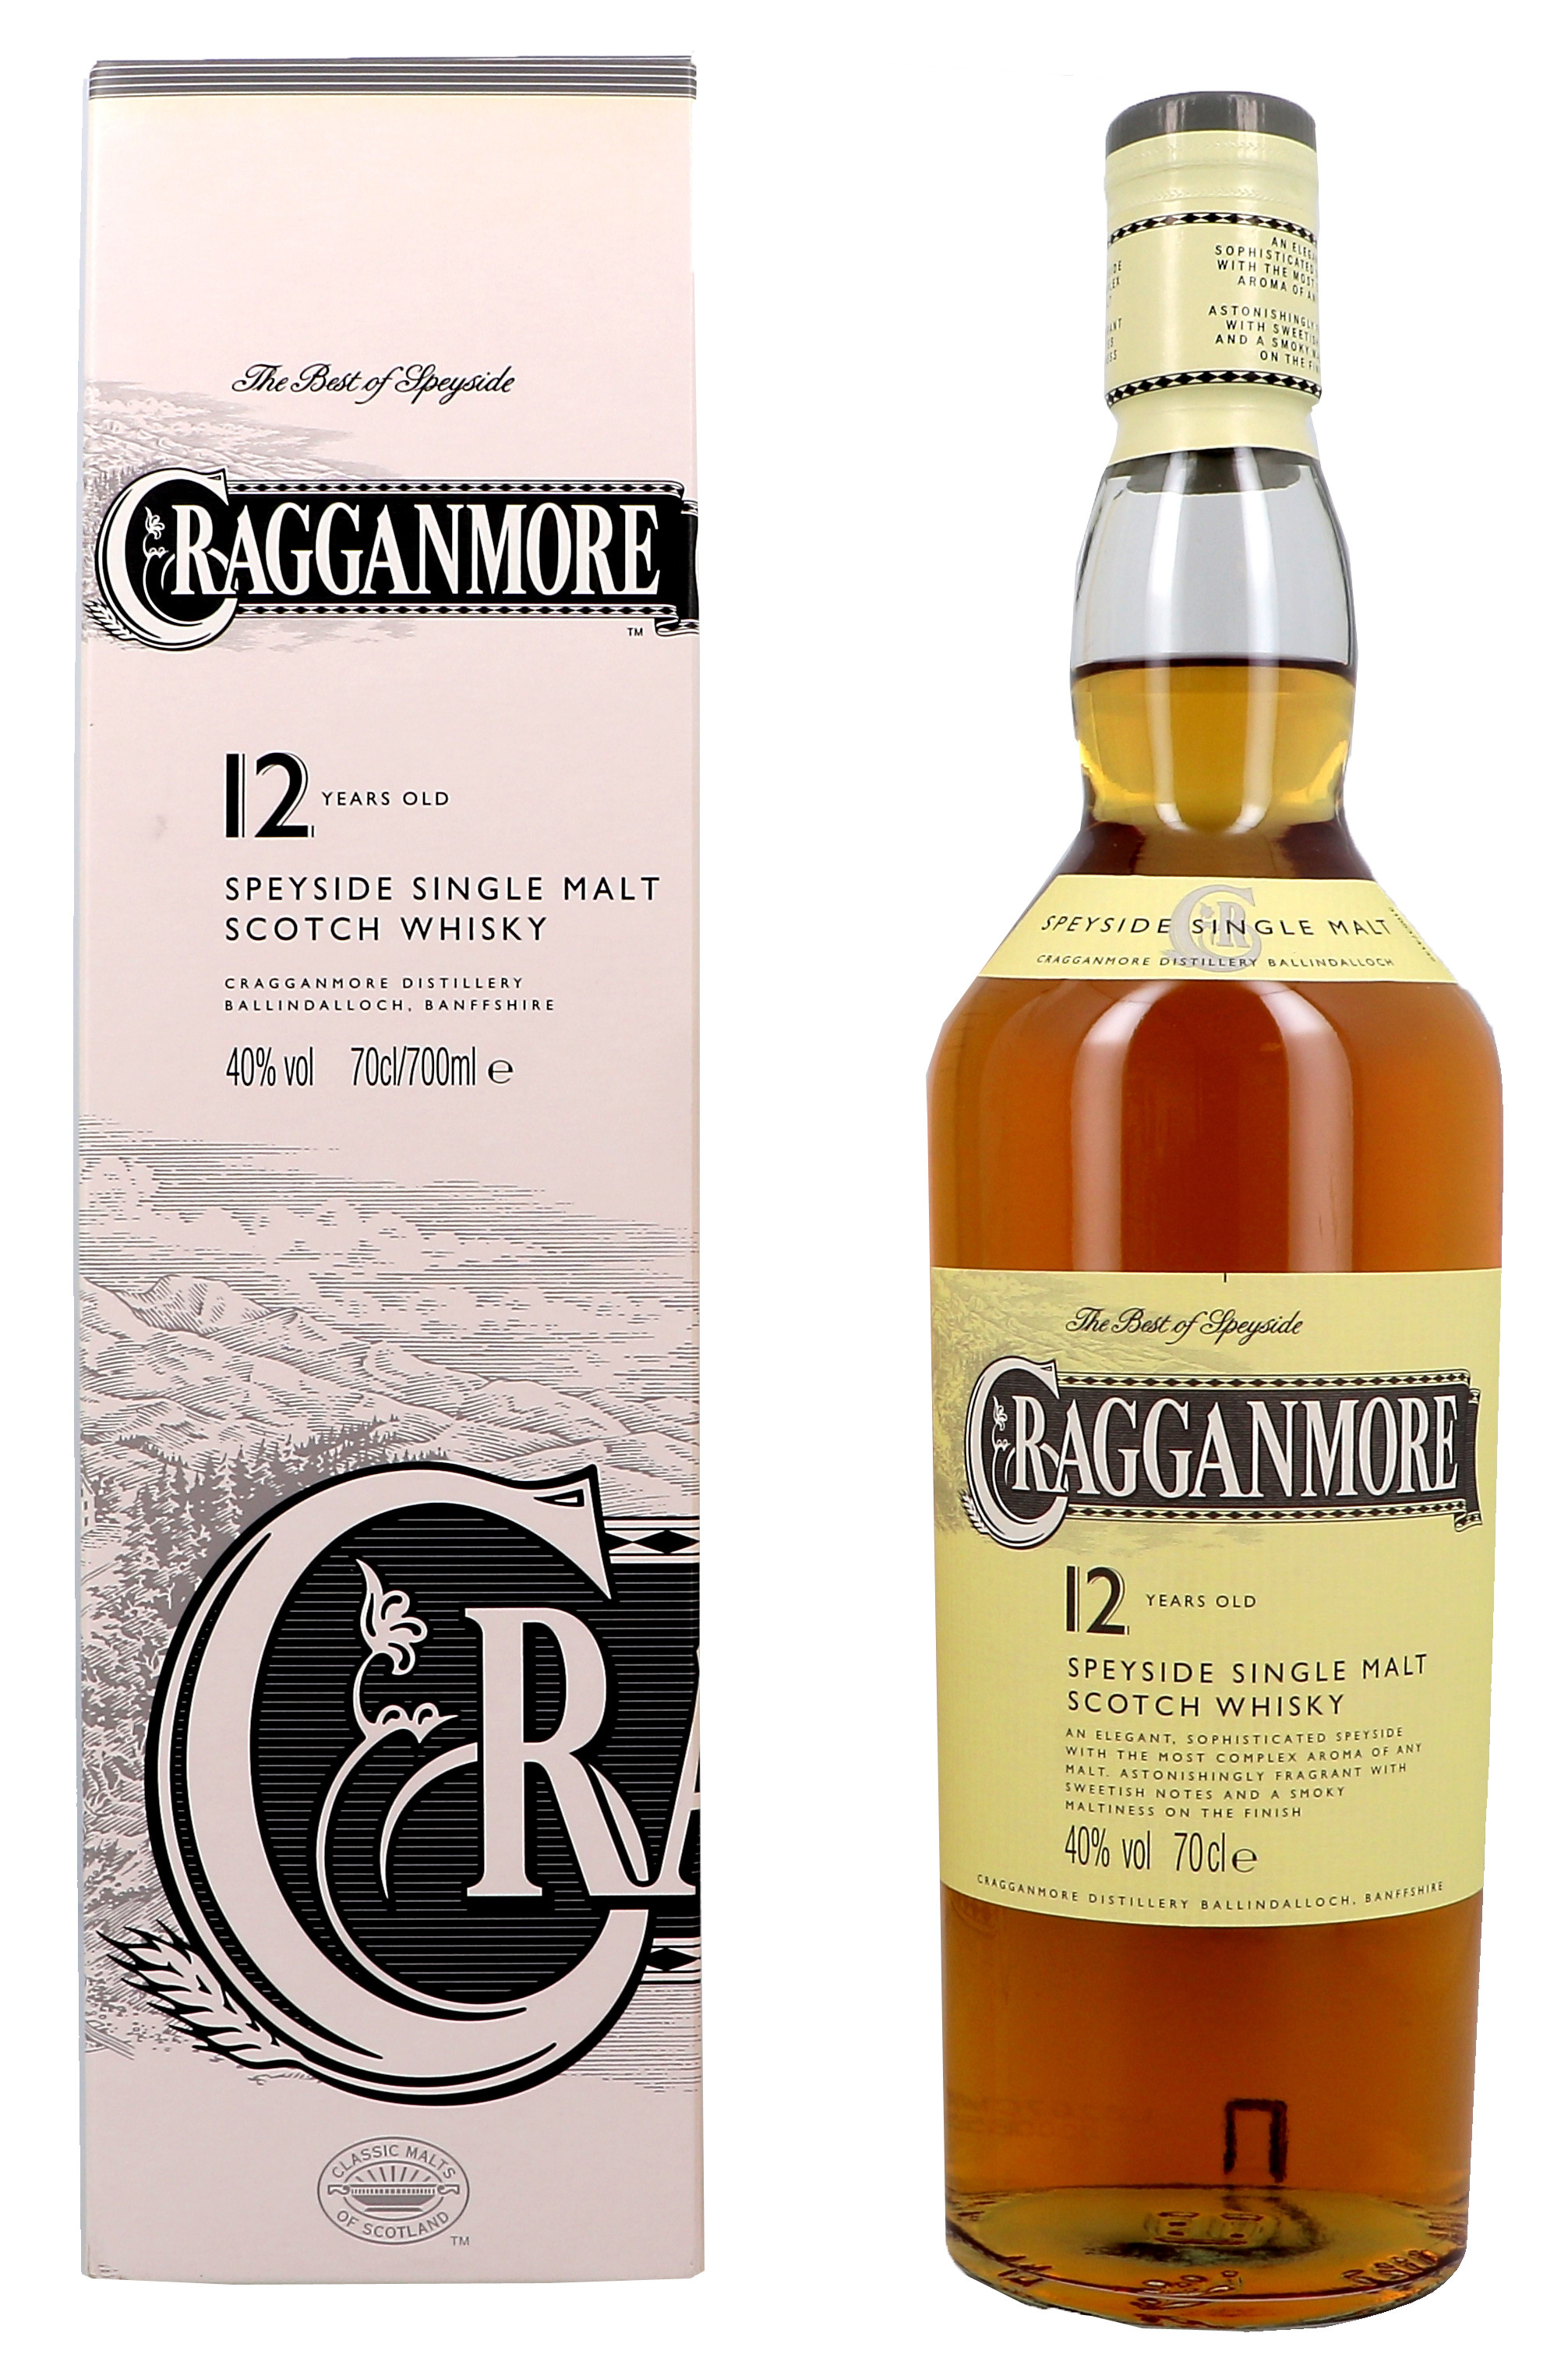 Cragganmore 12 Years 70cl 40% Speyside Single Malt Scotch Whisky 